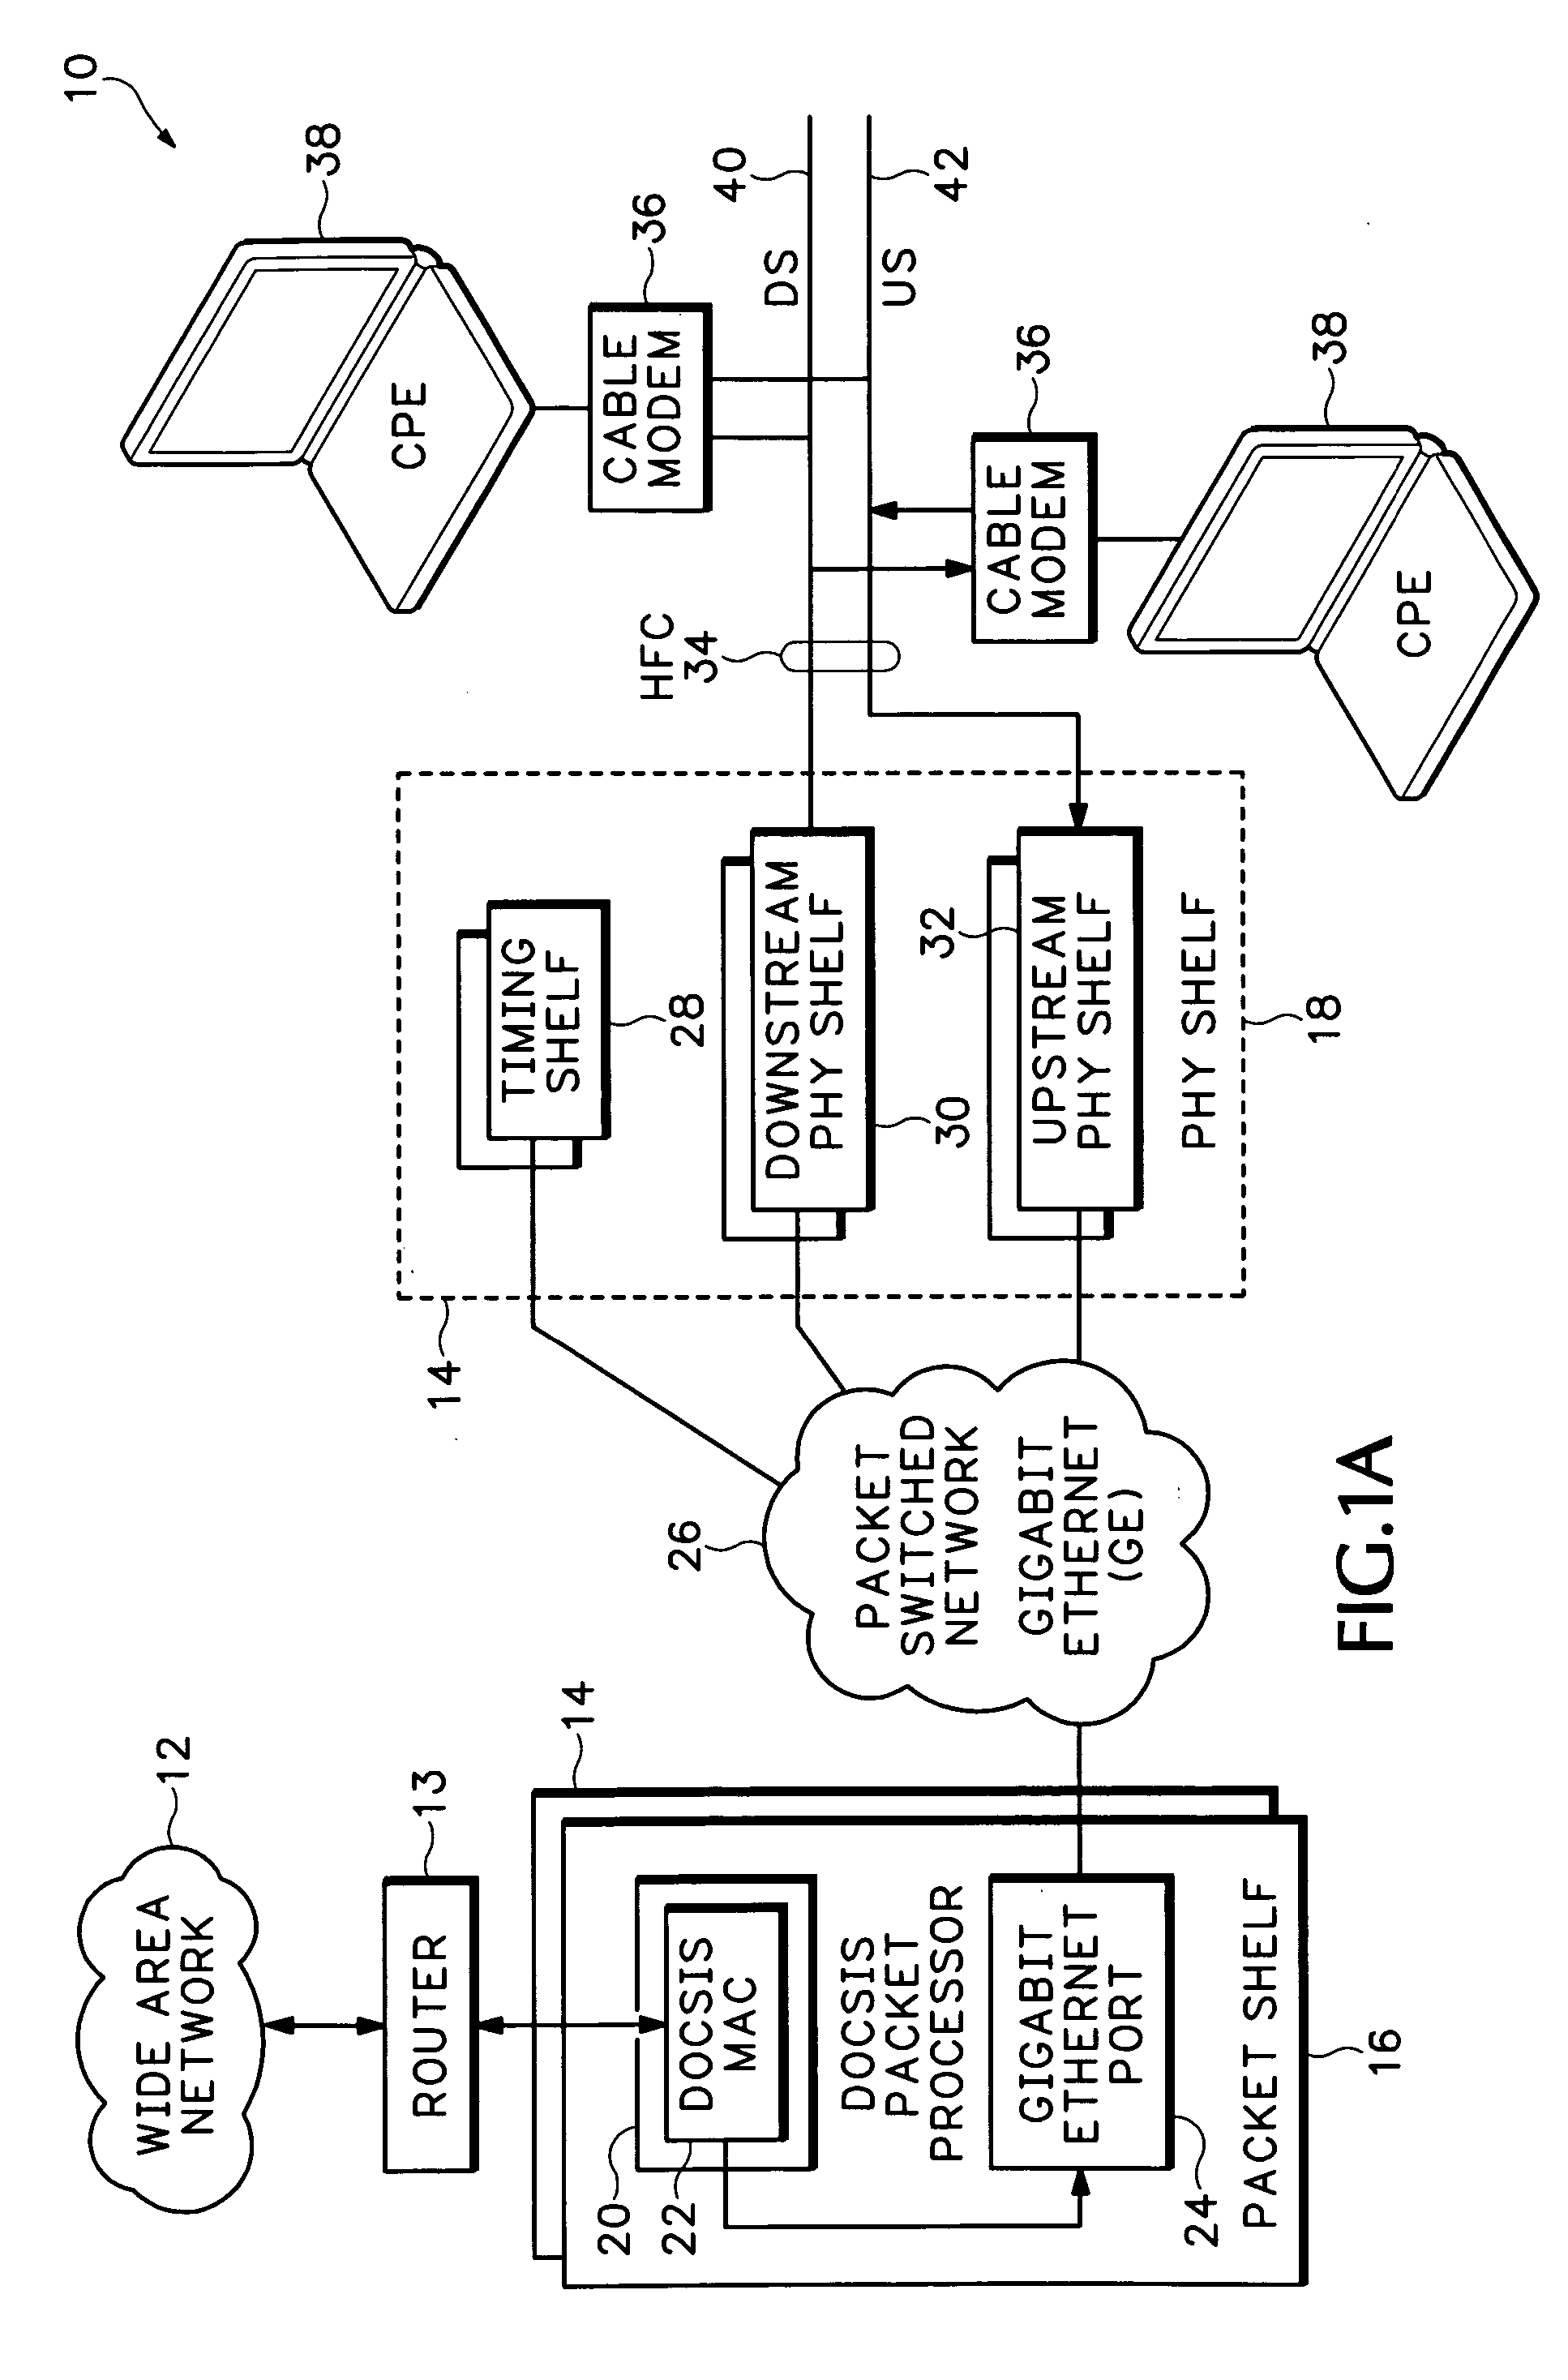 Timing system for modular cable modem termination system